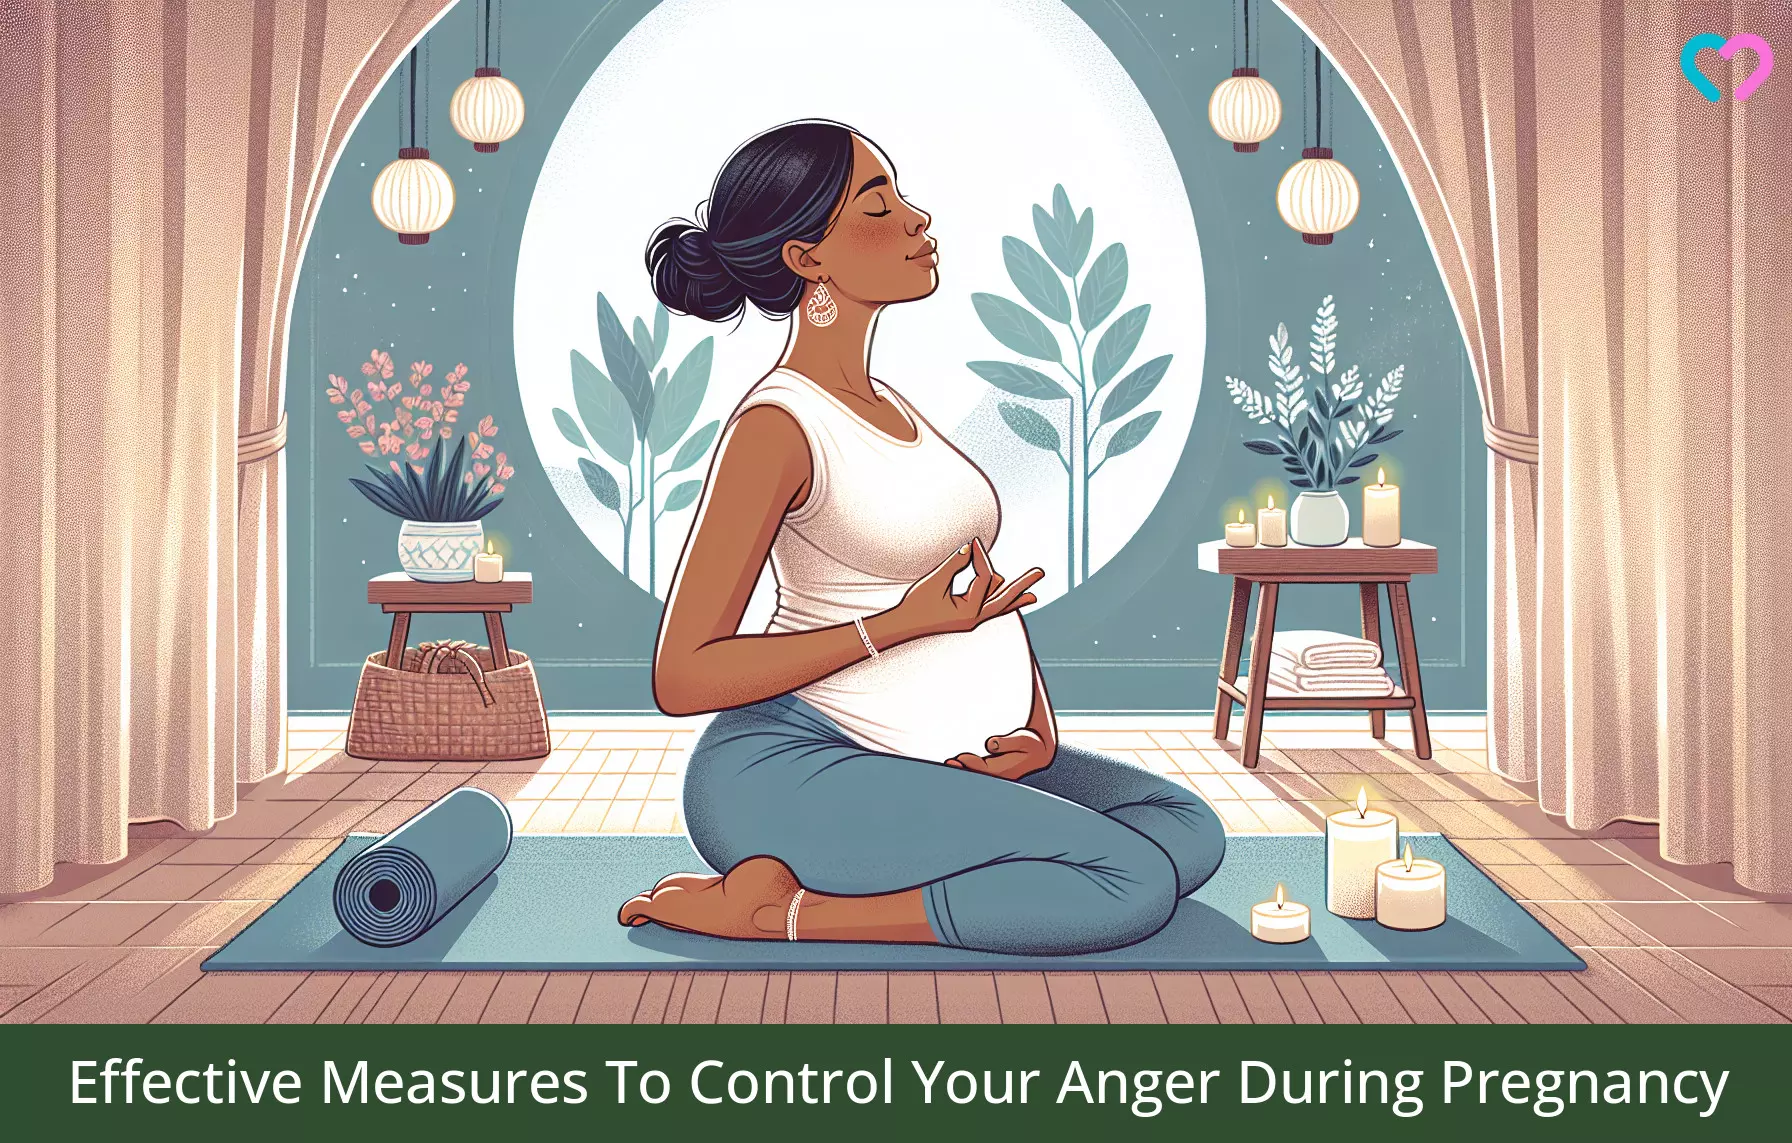 Factors That Cause Anger During Pregnancy_illustration